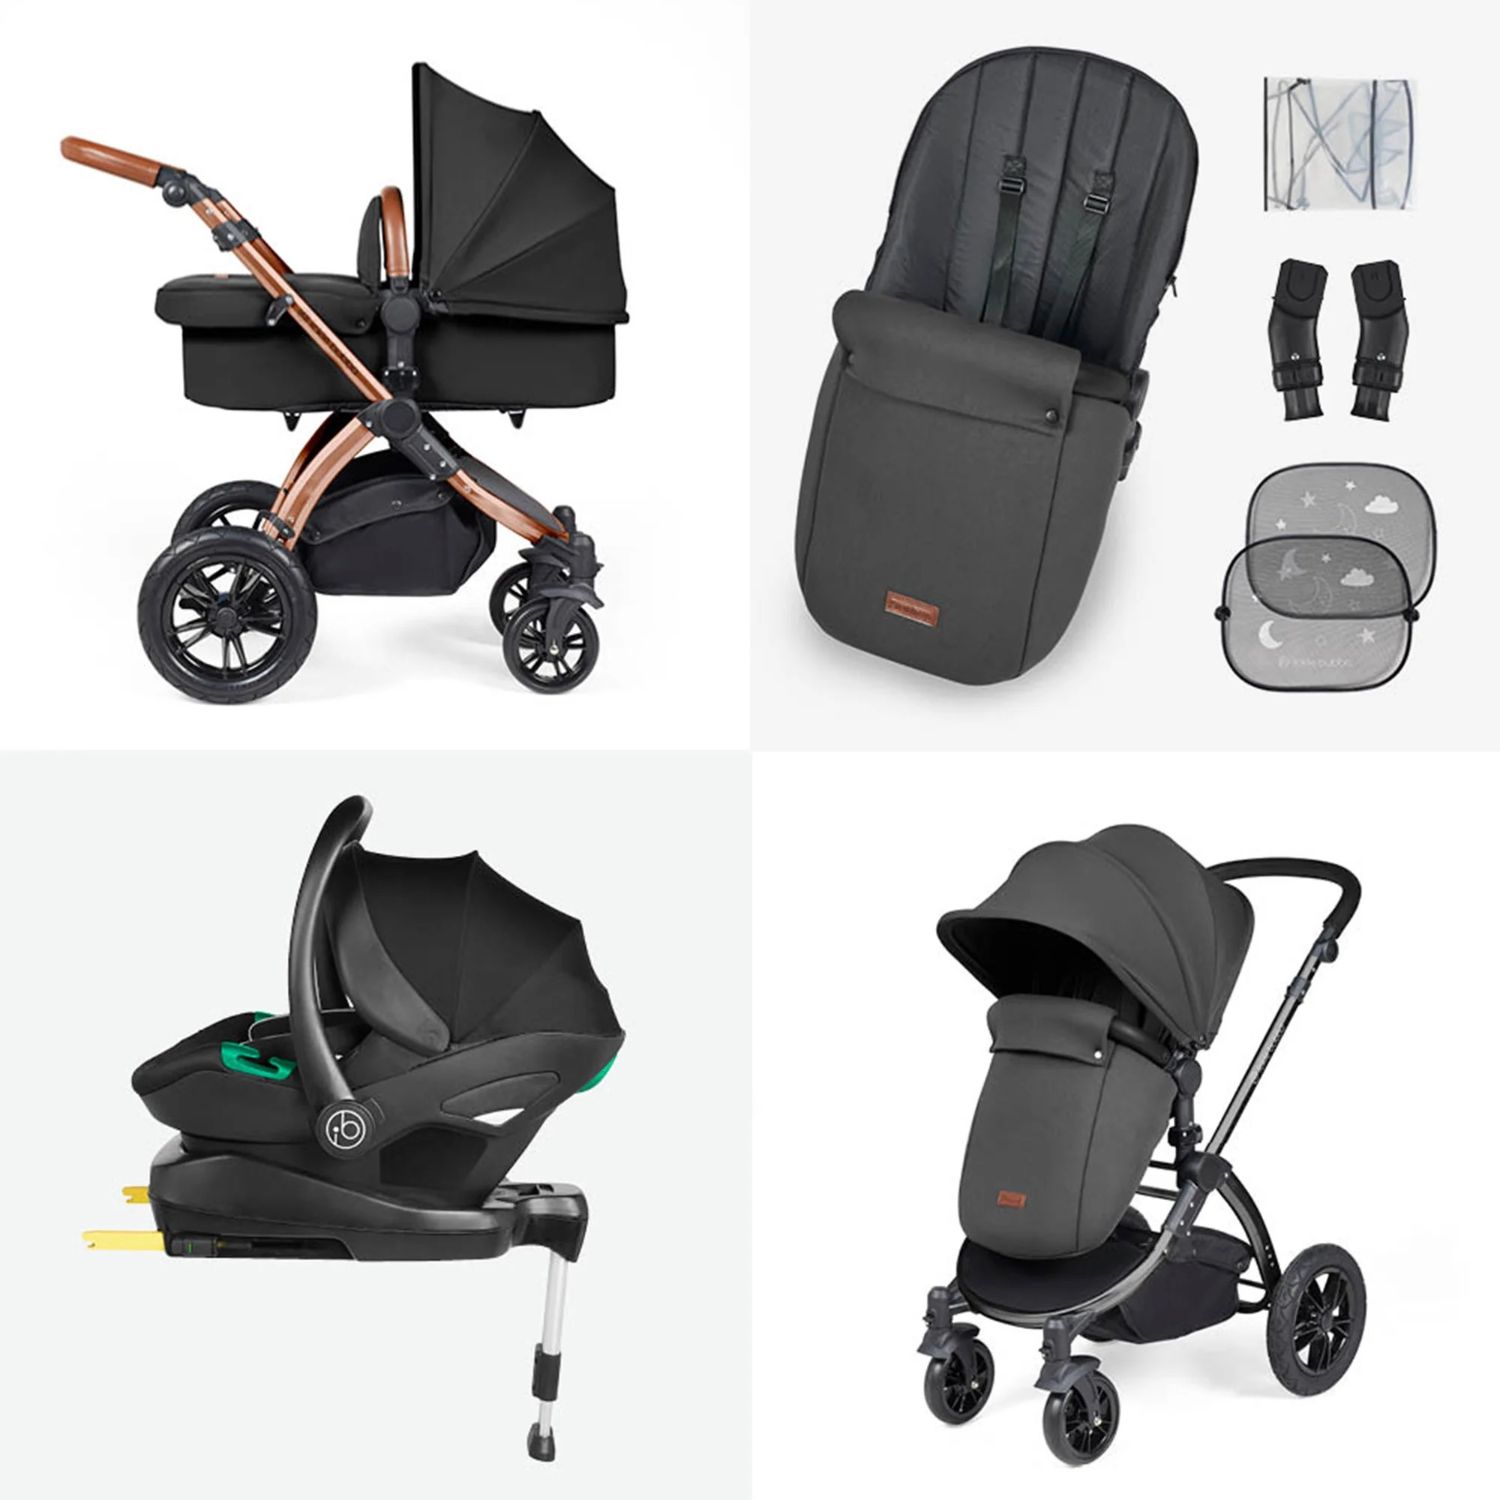 Components and other inclusions in the Ickle Bubba Stomp Luxe All-in-One Travel System bundle